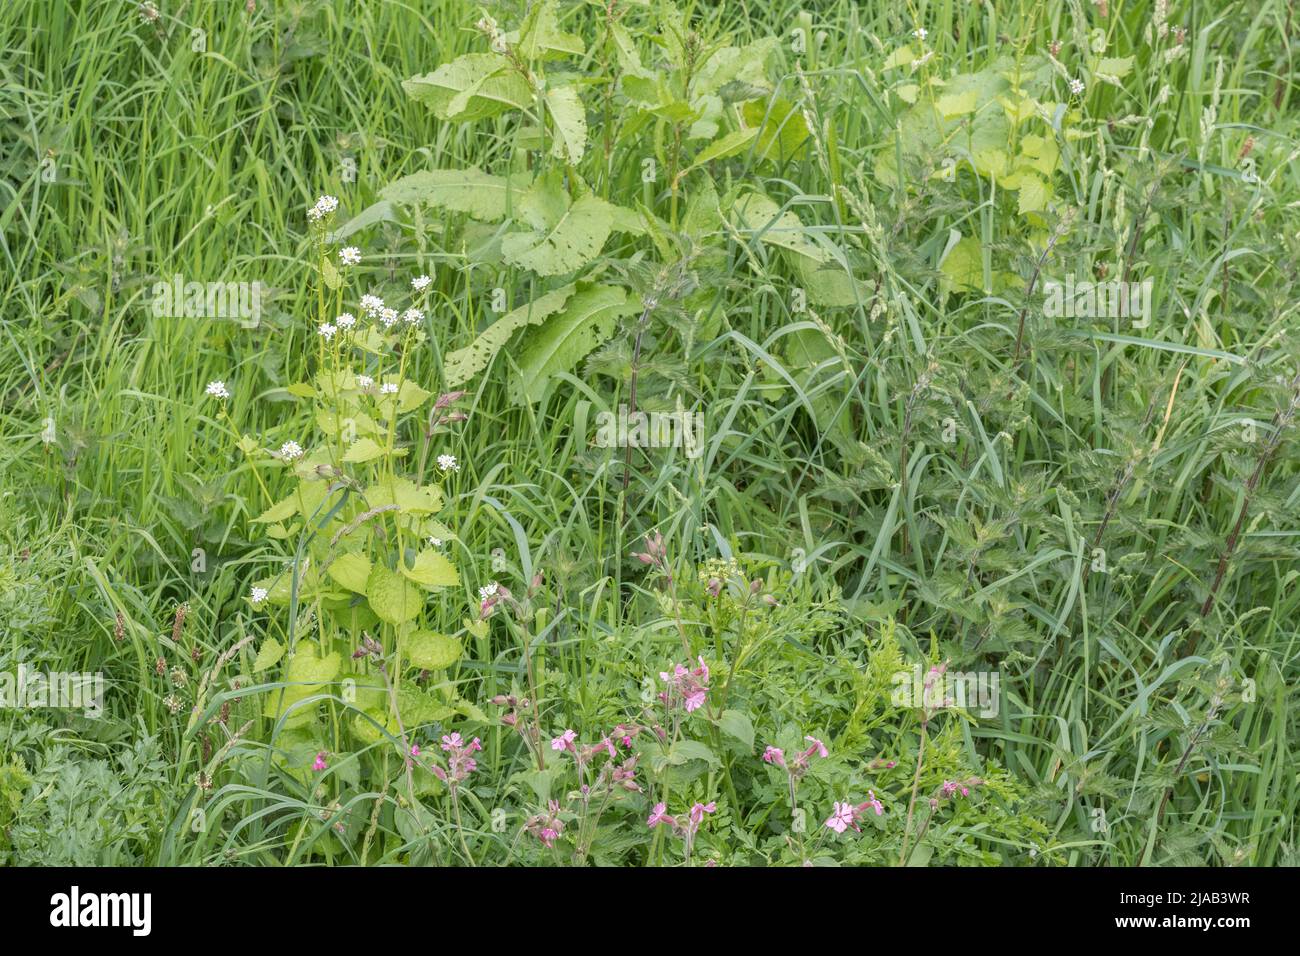 Leaves / foliage and white flowers of Hedge Garlic / Jack-by-the-hedge / Alliaria petiolata in grass verge. H/G is a common edible wild plant. Stock Photo